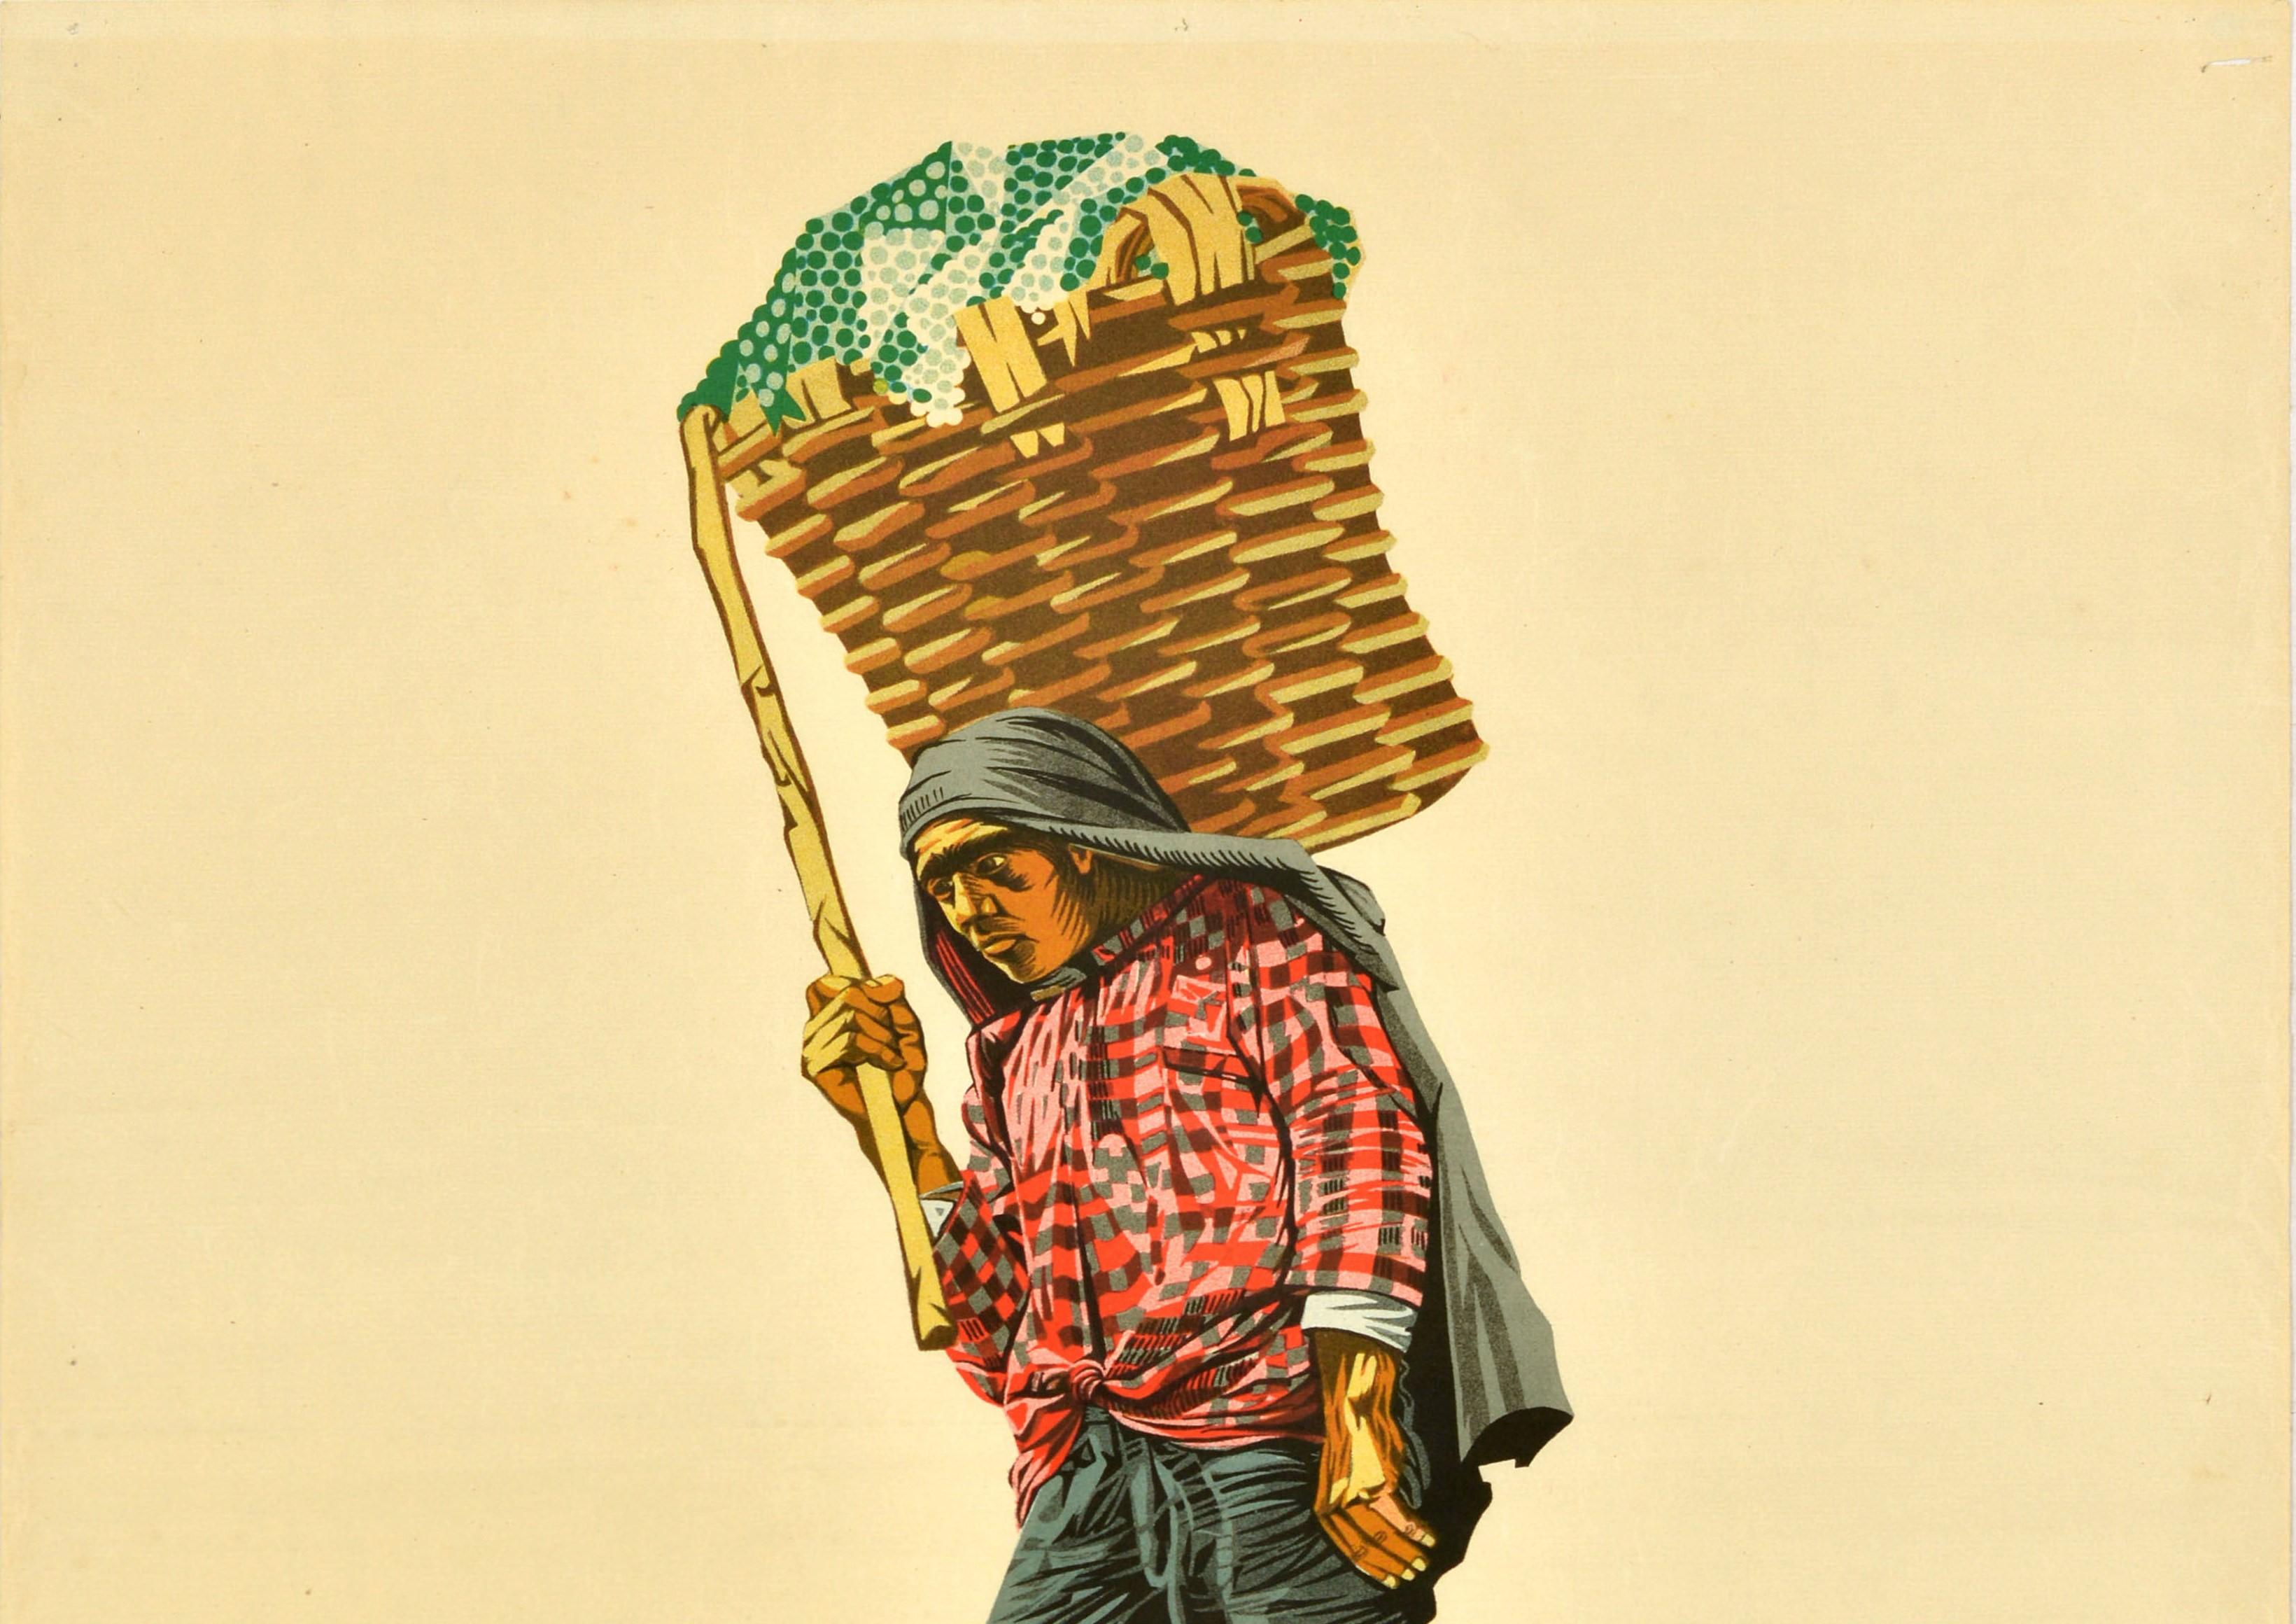 Original vintage drink advertising poster for a fortified port wine produced in Porto Portugal - Porto Souza Guedes - featuring an illustration of a worker carrying a large woven basket of grapes on his back with the title in bold red and black